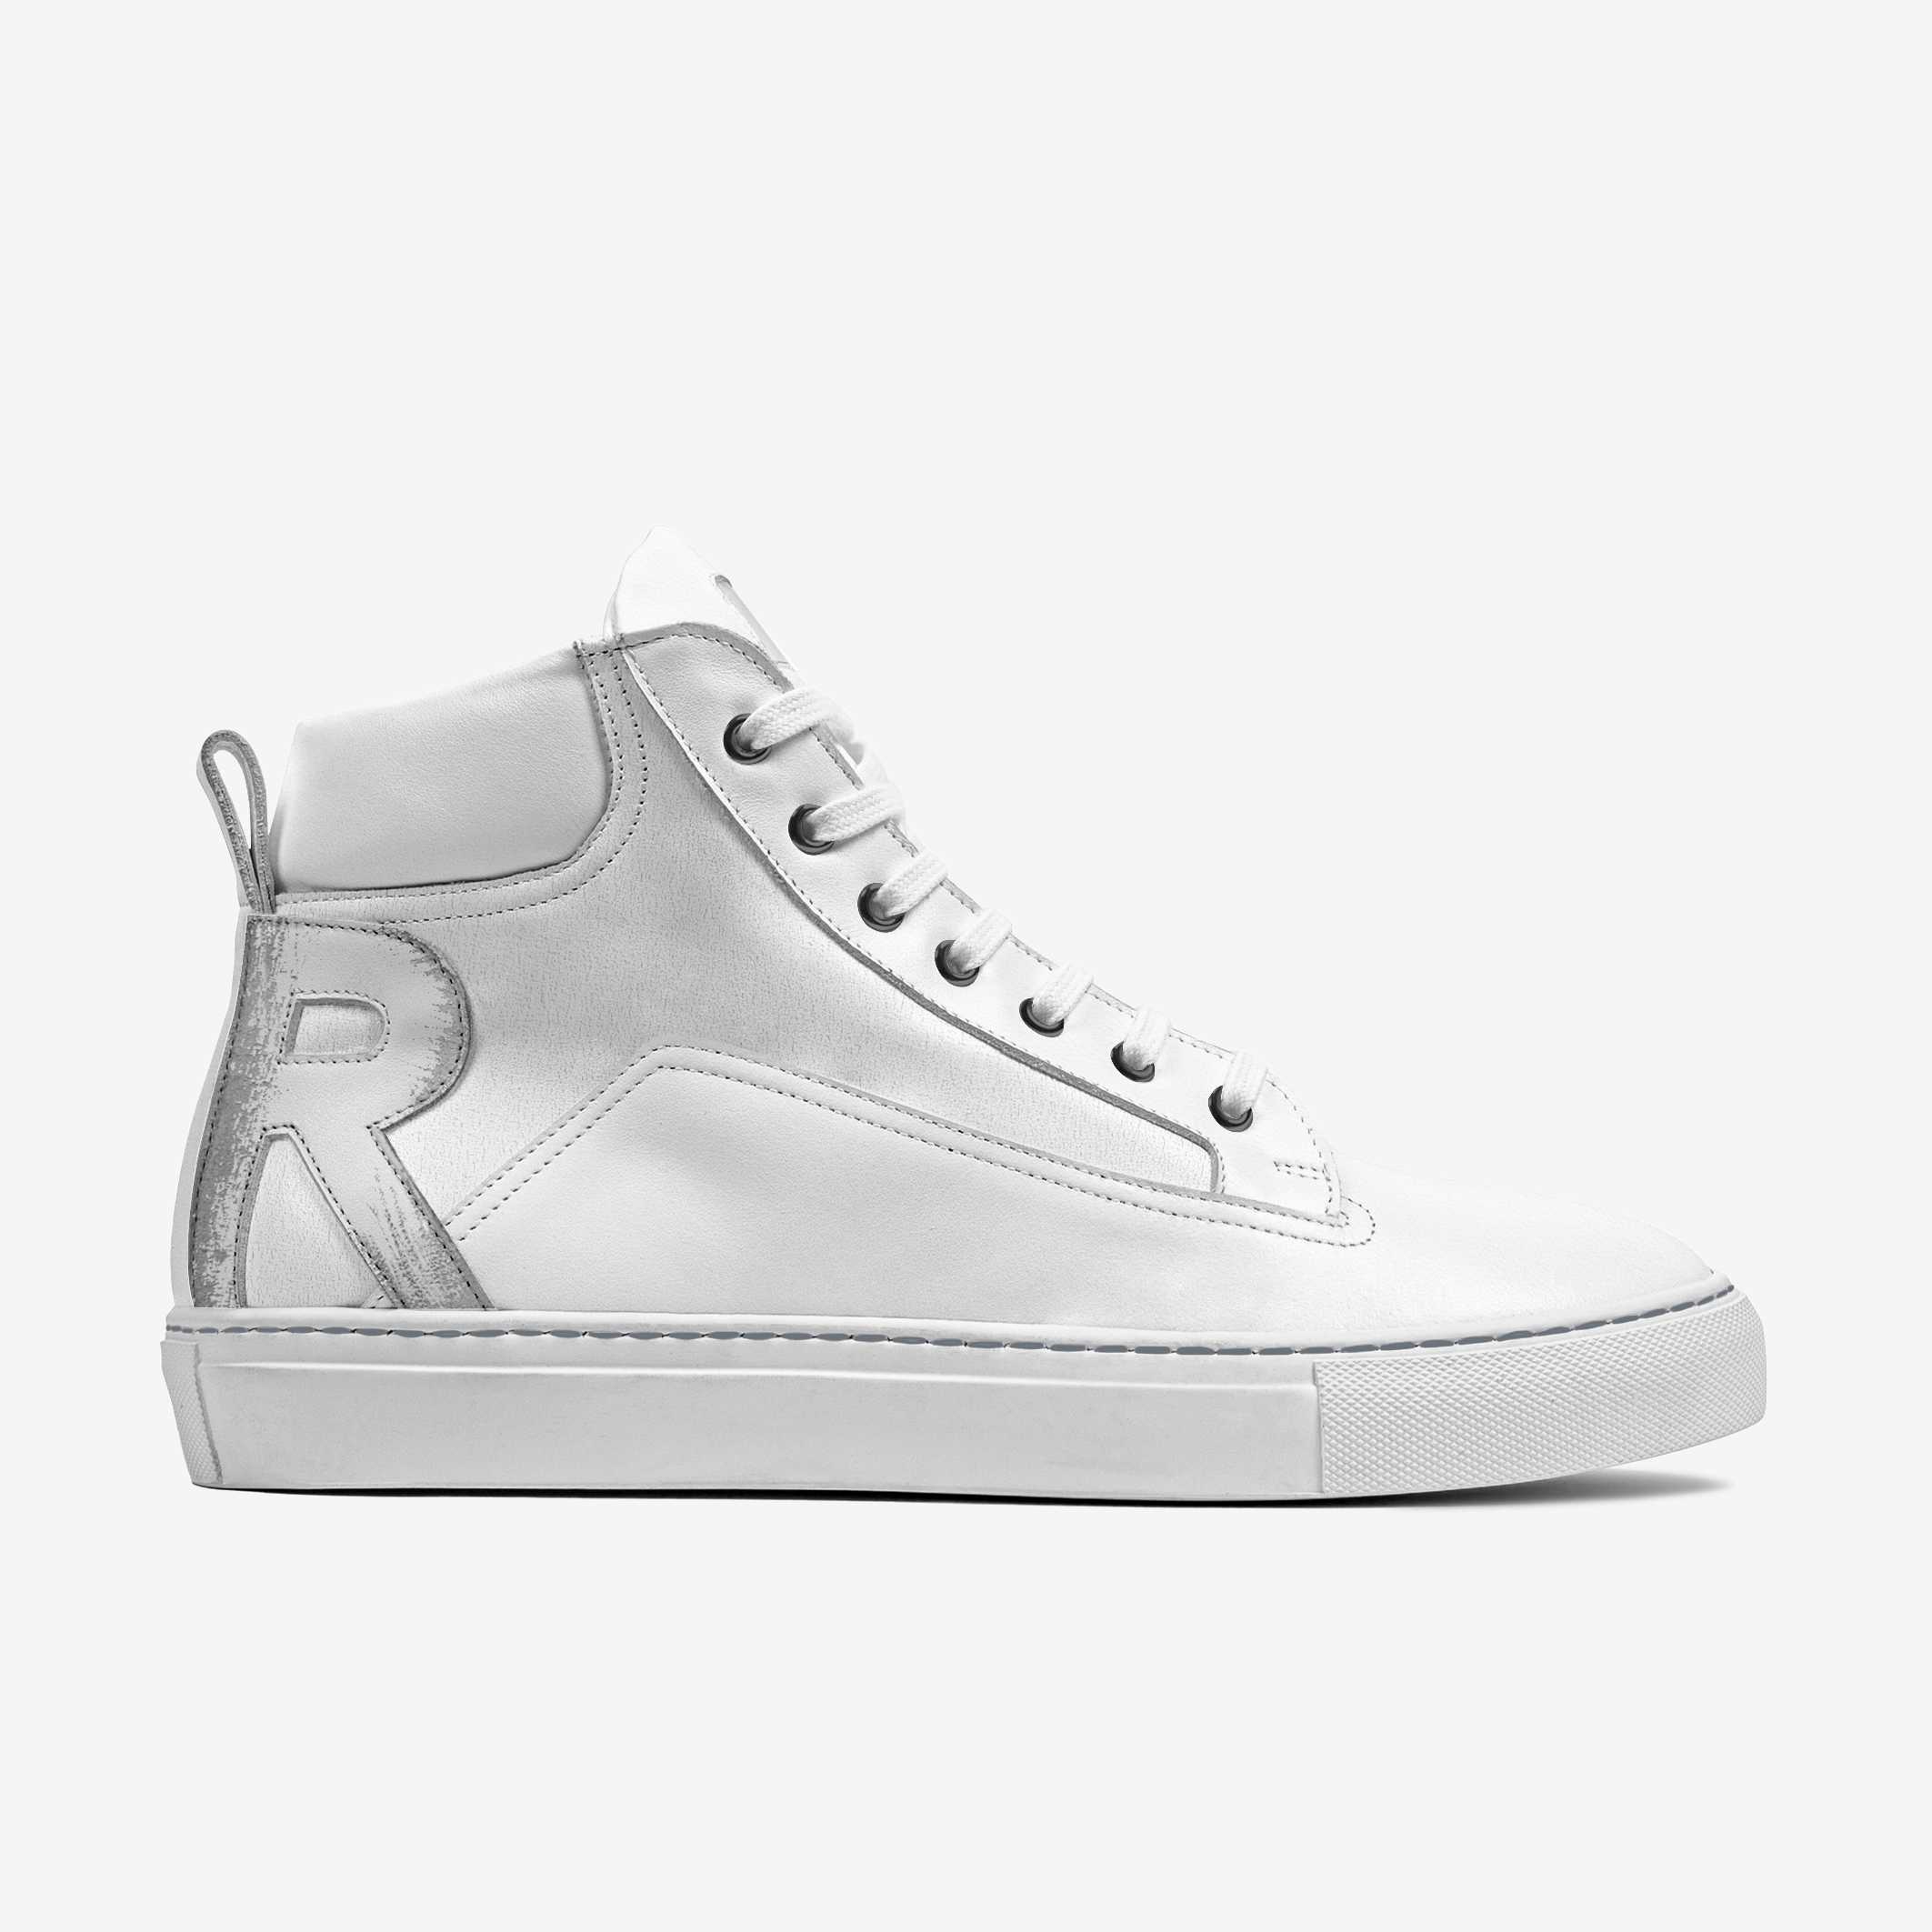 O.G. RIDDICK [White-Out] - Riddick Shoes Shoe Riddick Shoes   